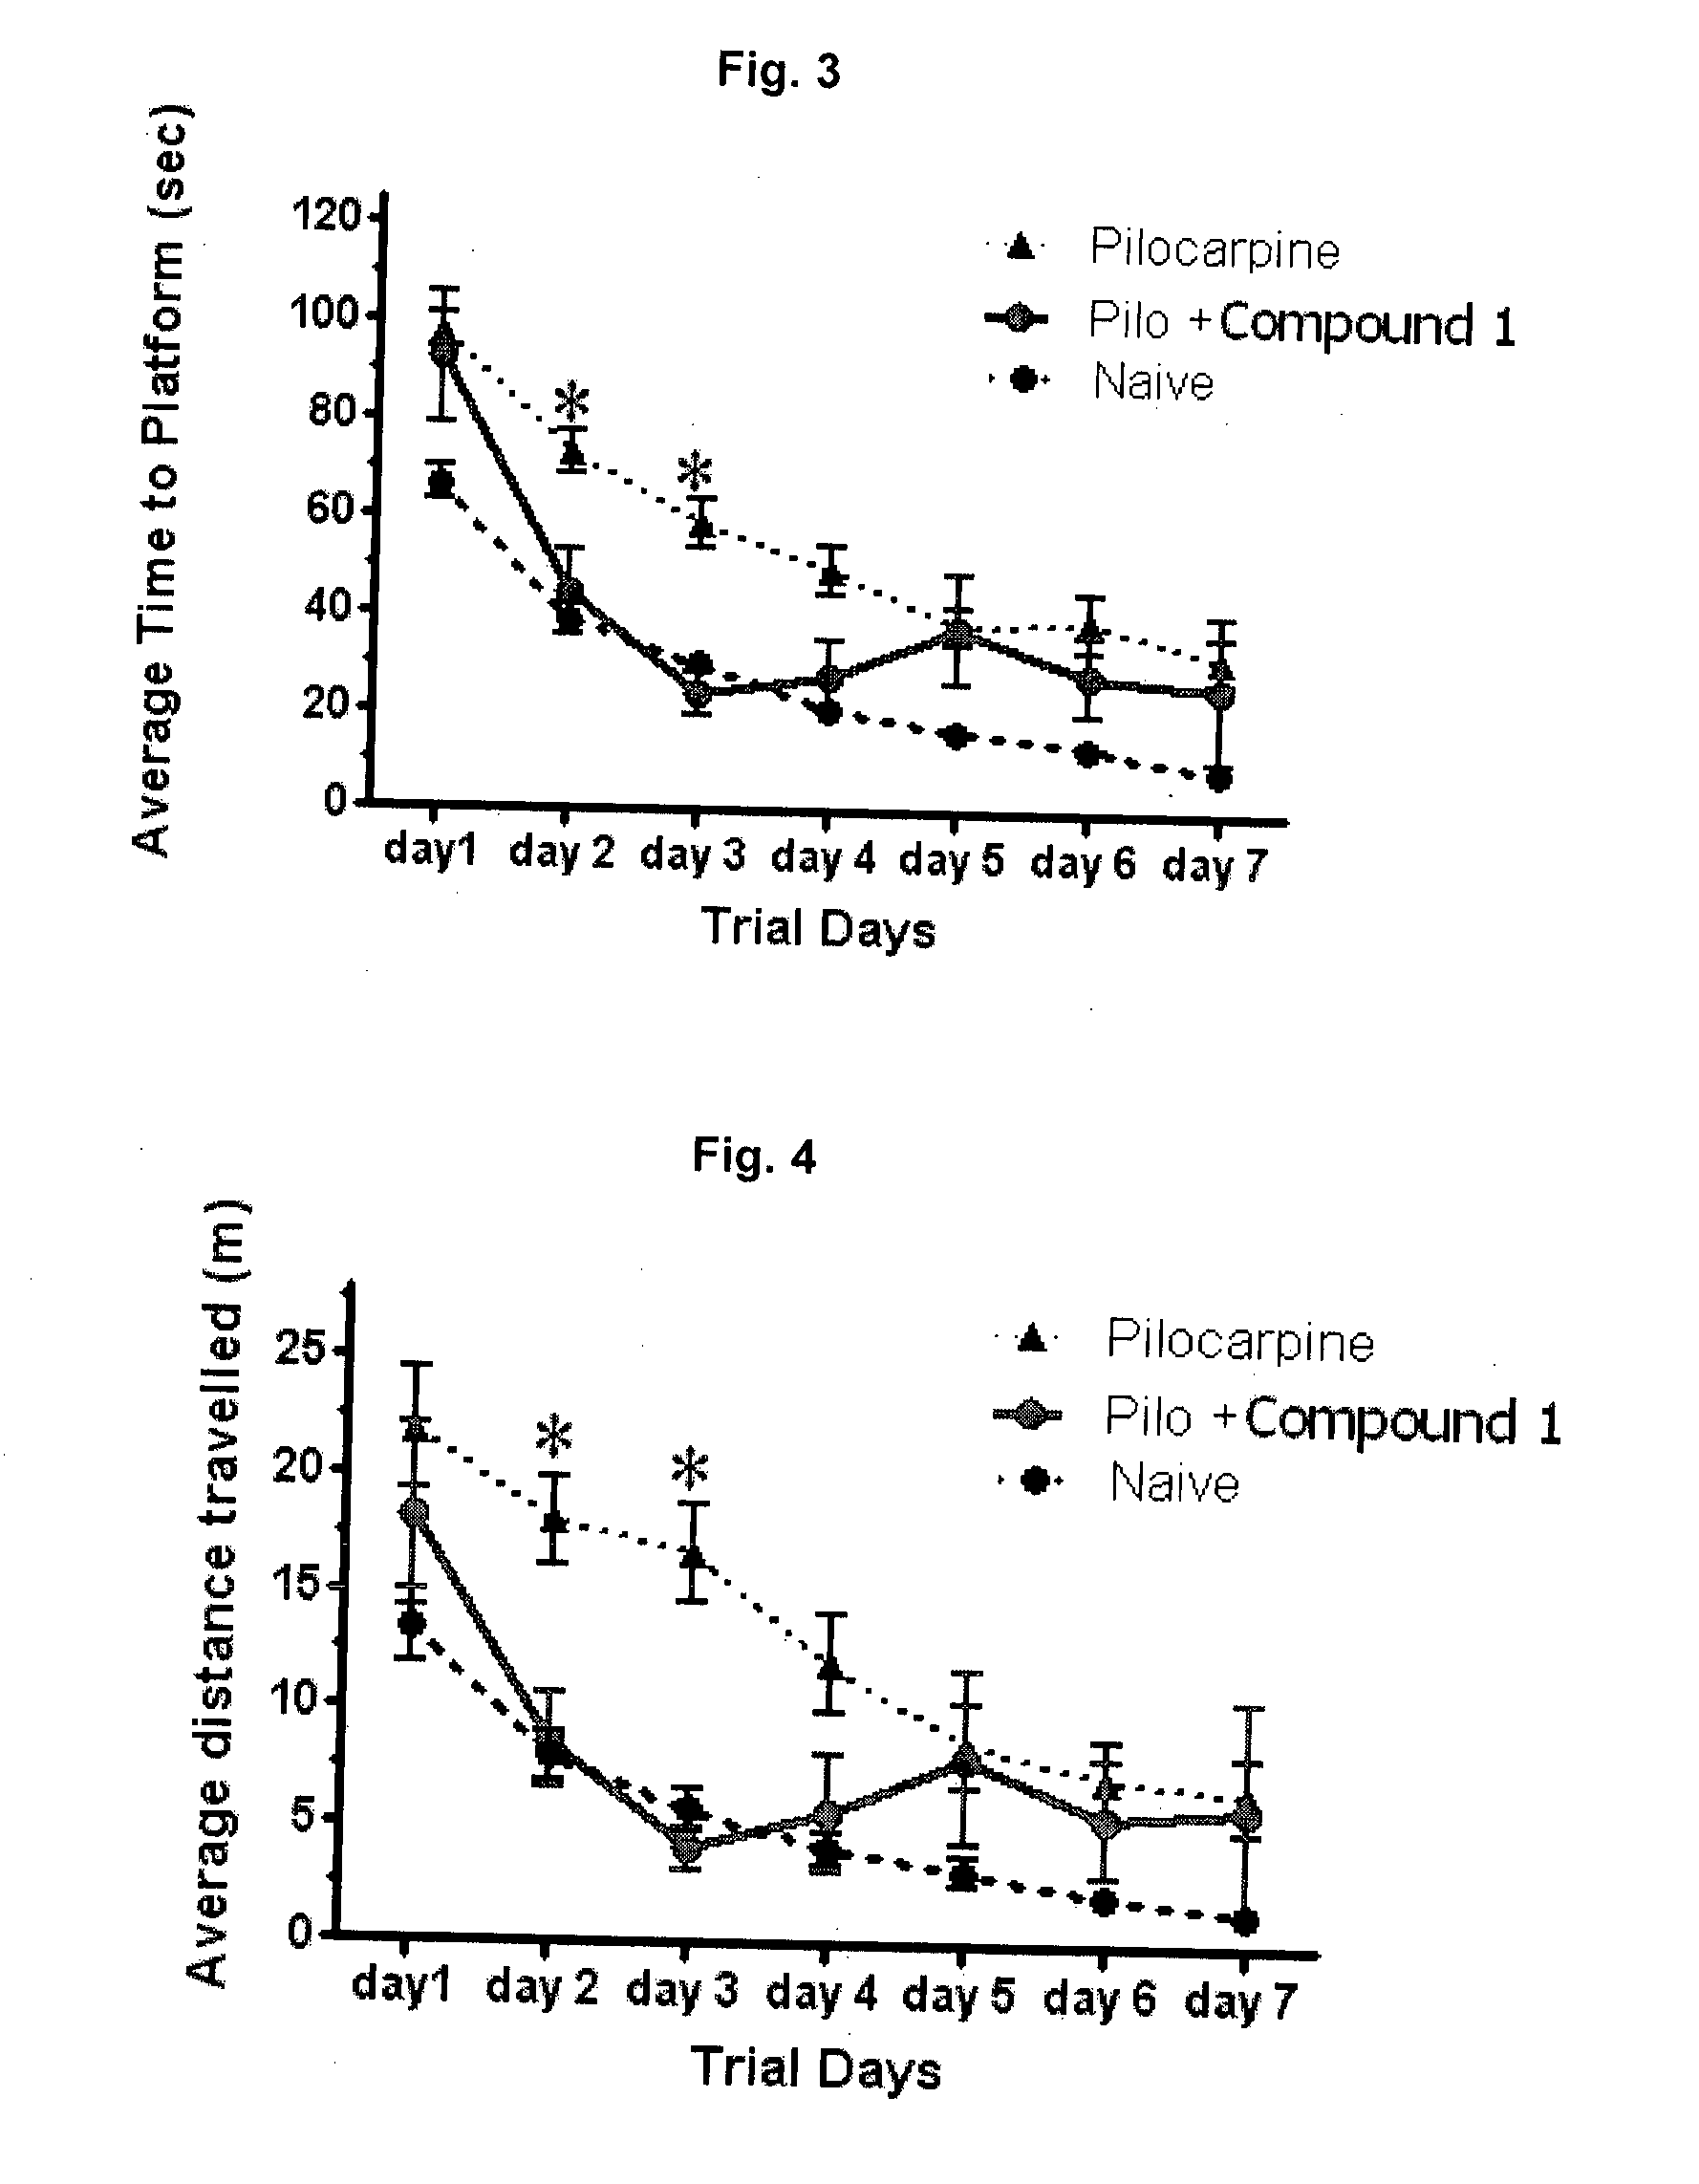 Phenyl Carbamate Compound and a Composition for Preventing or Treating a Memory Loss-Related Disease Comprising the Same